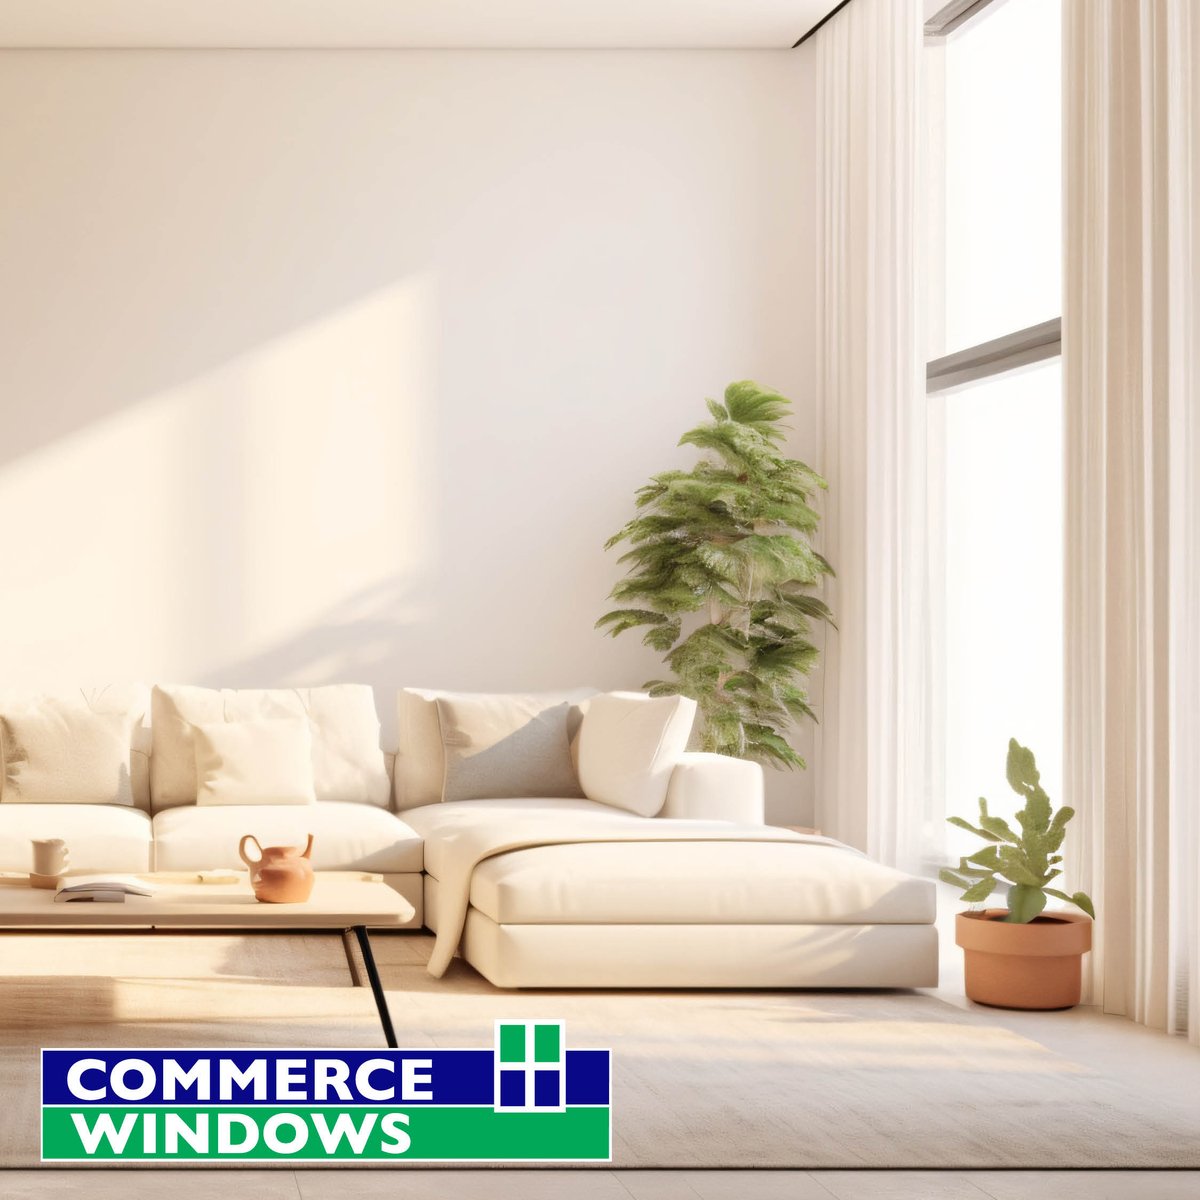 🌟 Let natural light flood into your living space with our energy-efficient windows from Commerce Windows. 

Not only do they brighten up your home, but they also help you save on energy bills!

Explore our range today and let the sunshine in. ☀️ 

#BrightIdeas #EnergySavings